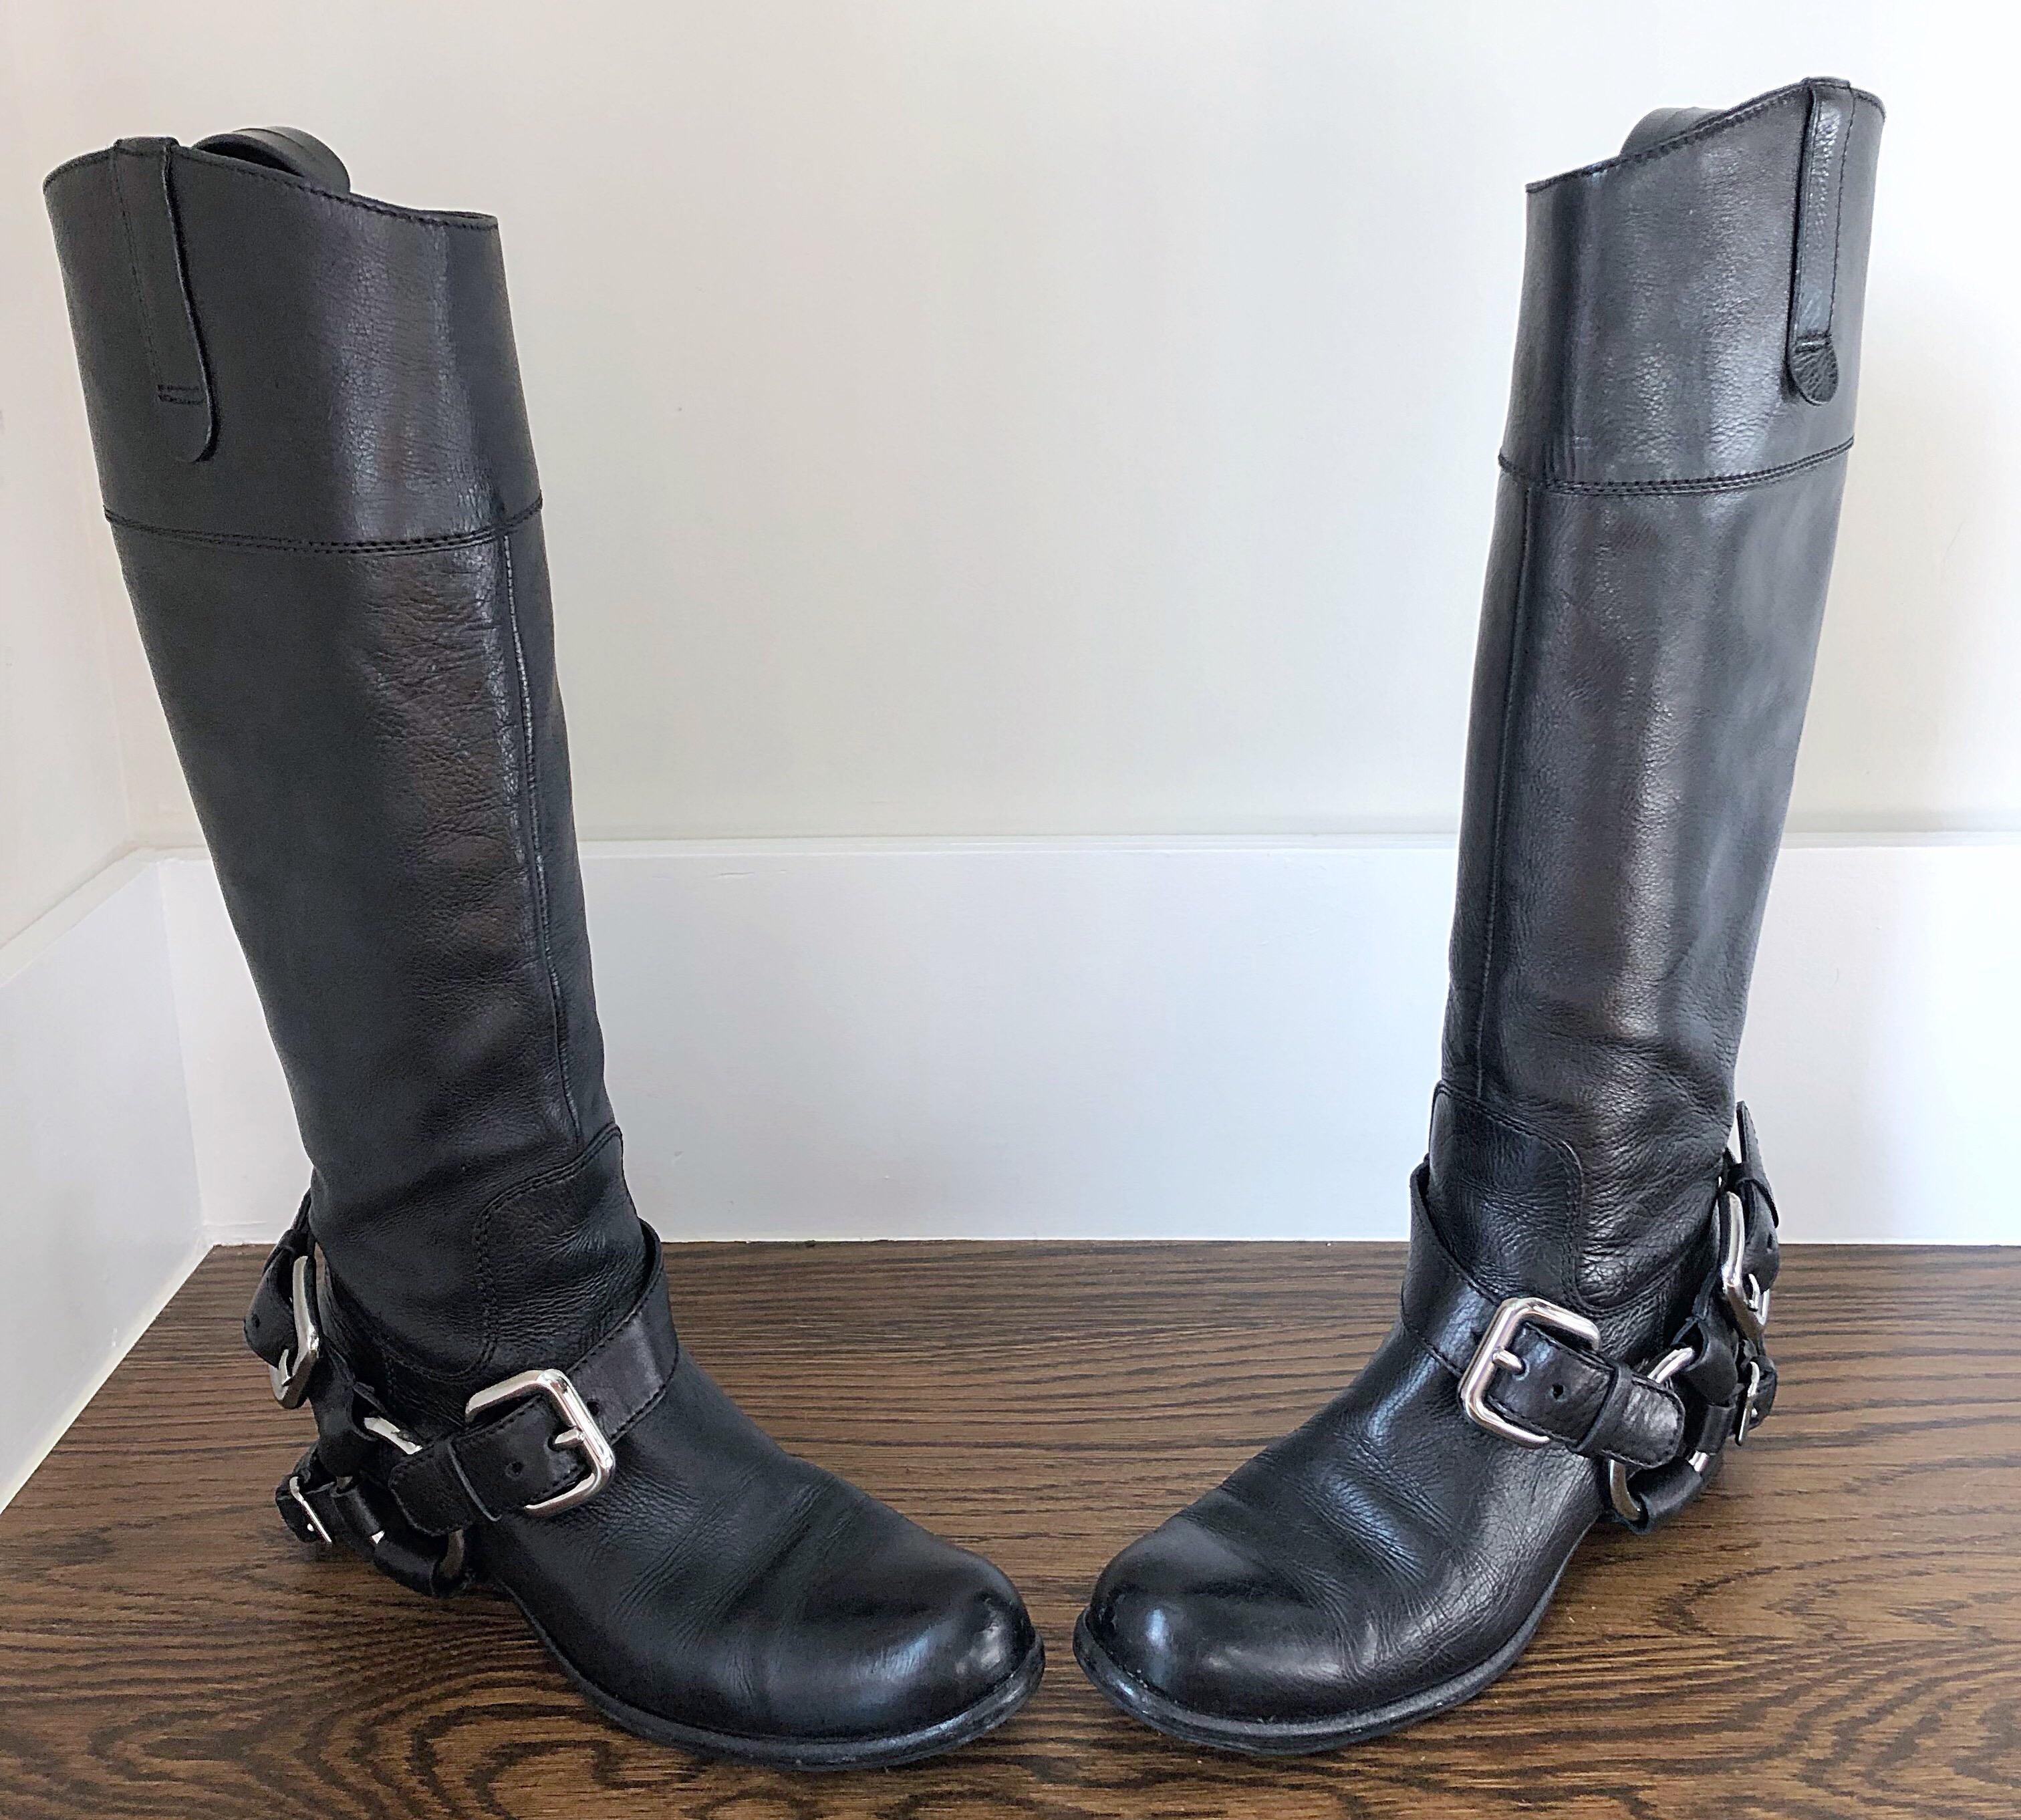 Chic late 90s MIU MIU black leather flat motorcycle boots with removable silver buckle harness. Comfortable, yet stylish and great for everyday wear. Zips up the inner calf. Can easily be dressed up or down. Great with jeans, a skirt, or a dress. In